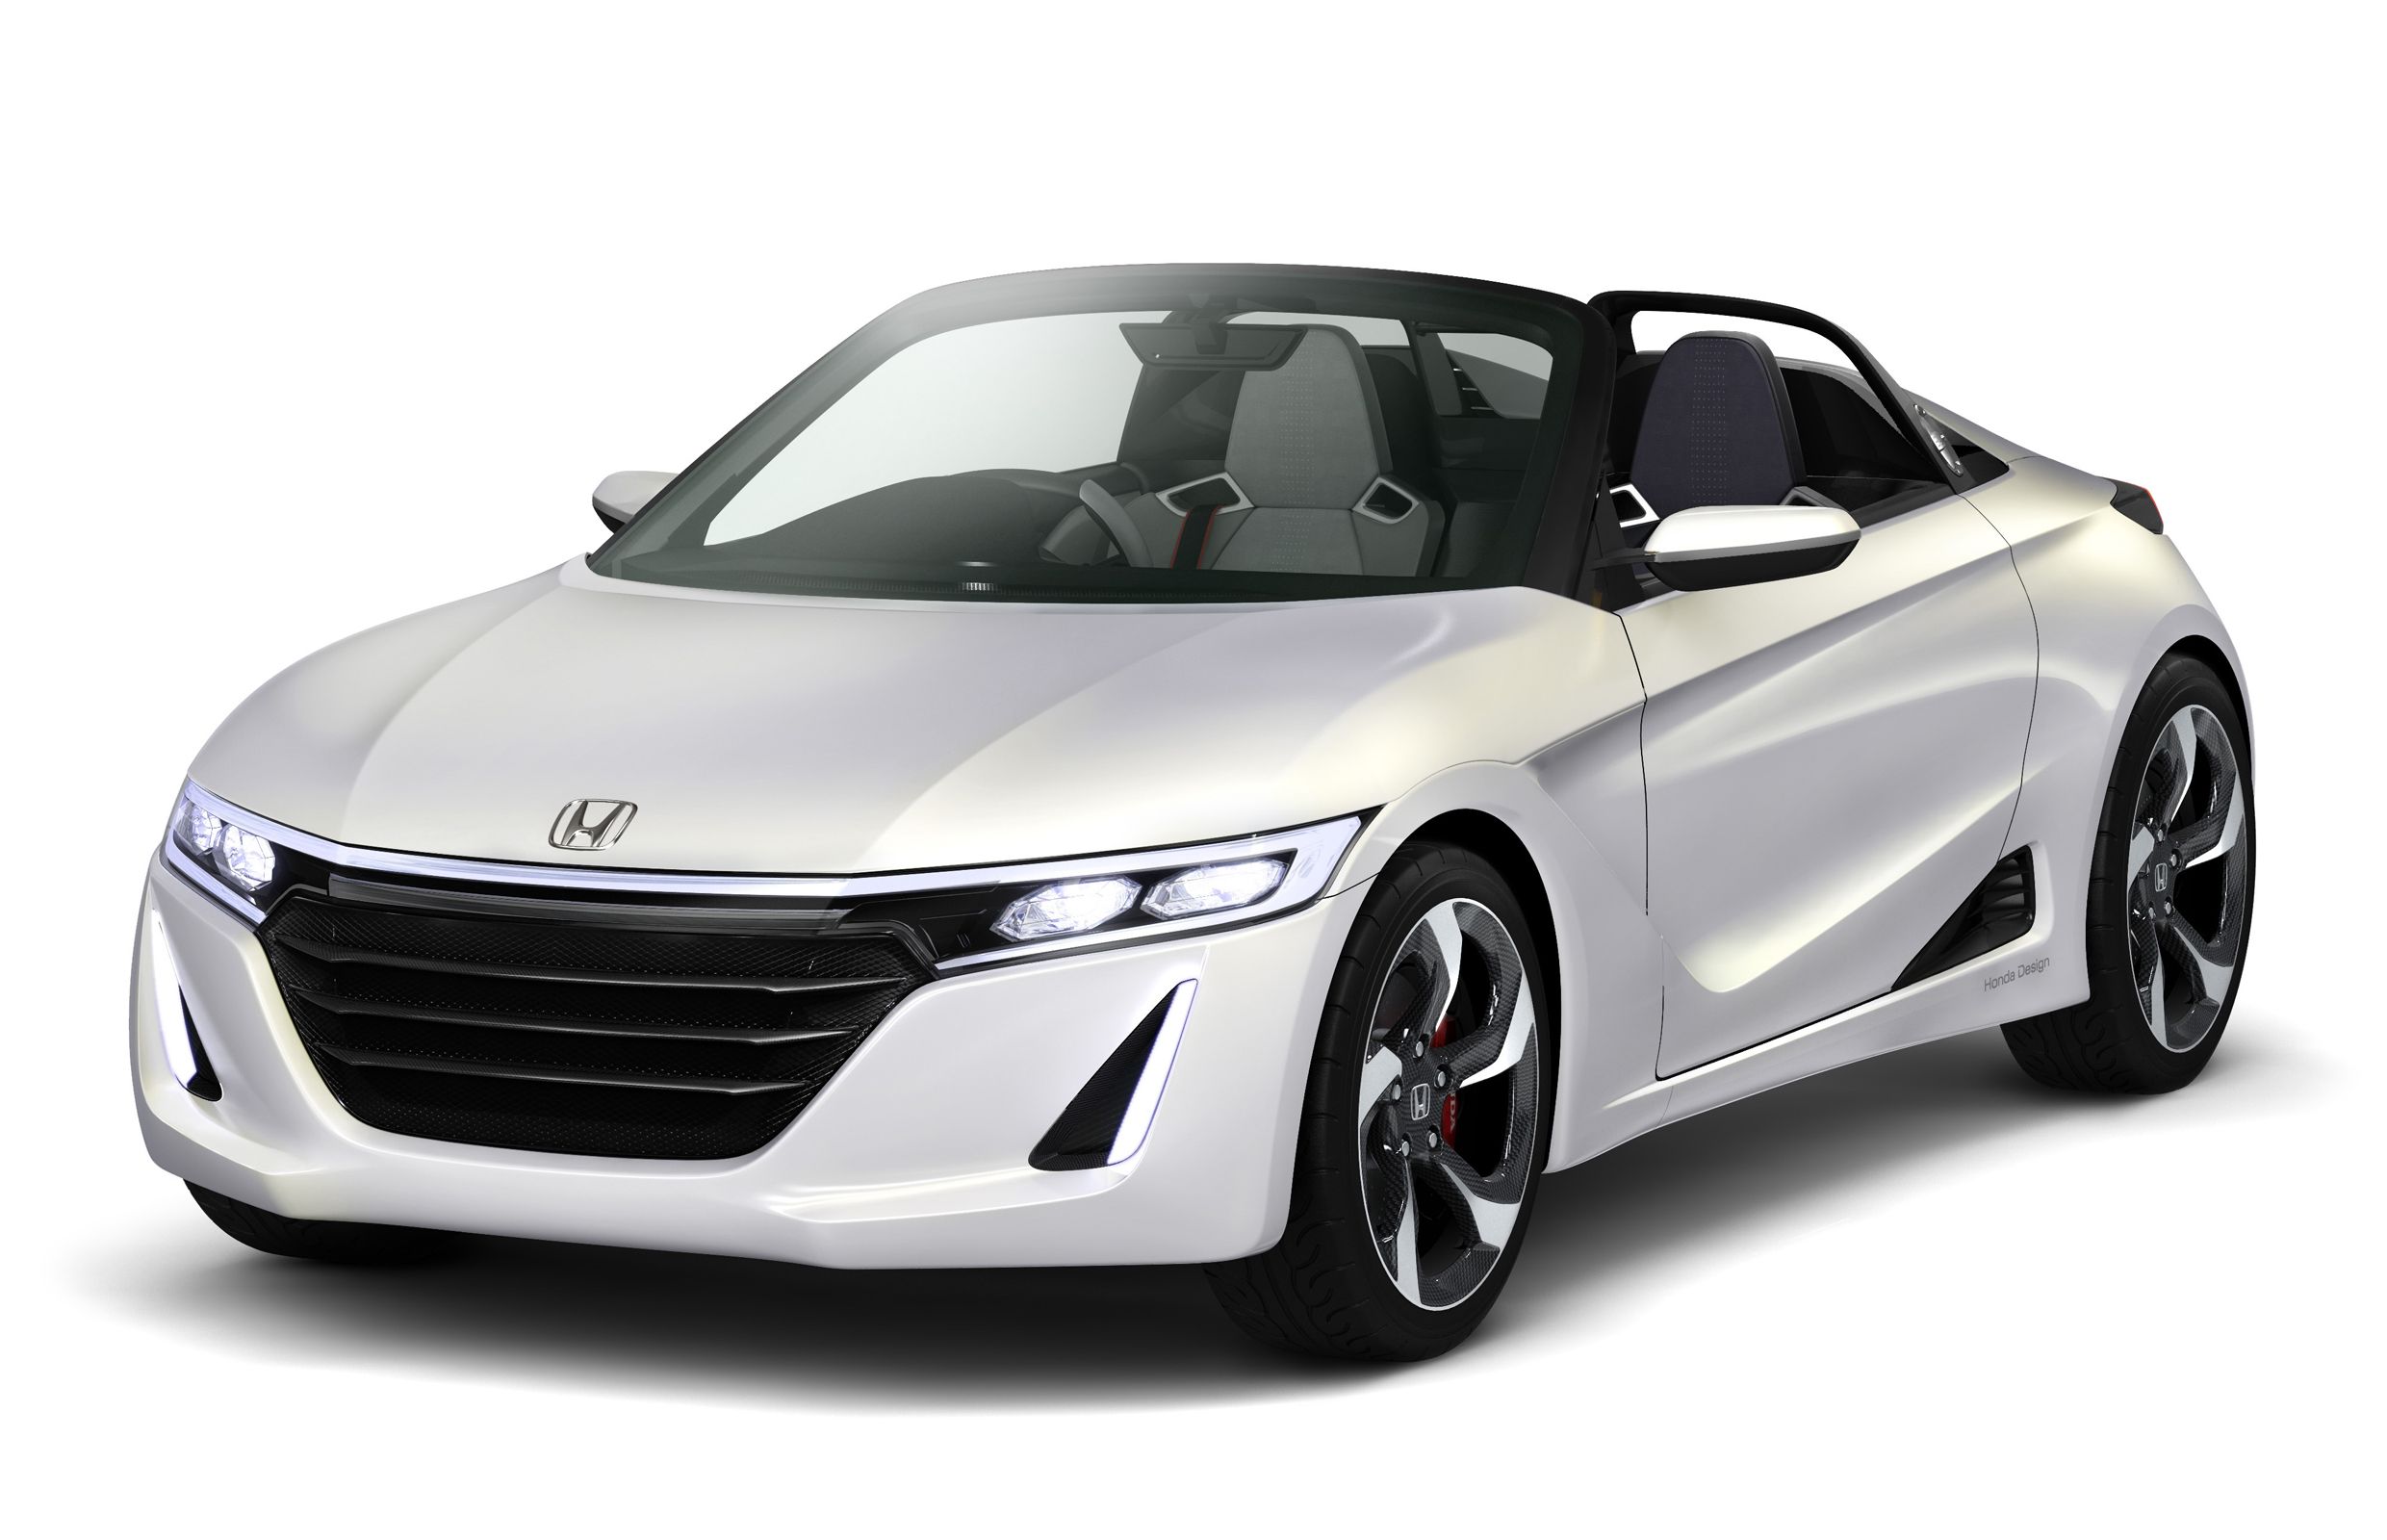 Honda S660 roadster expected to hit production next year Driving